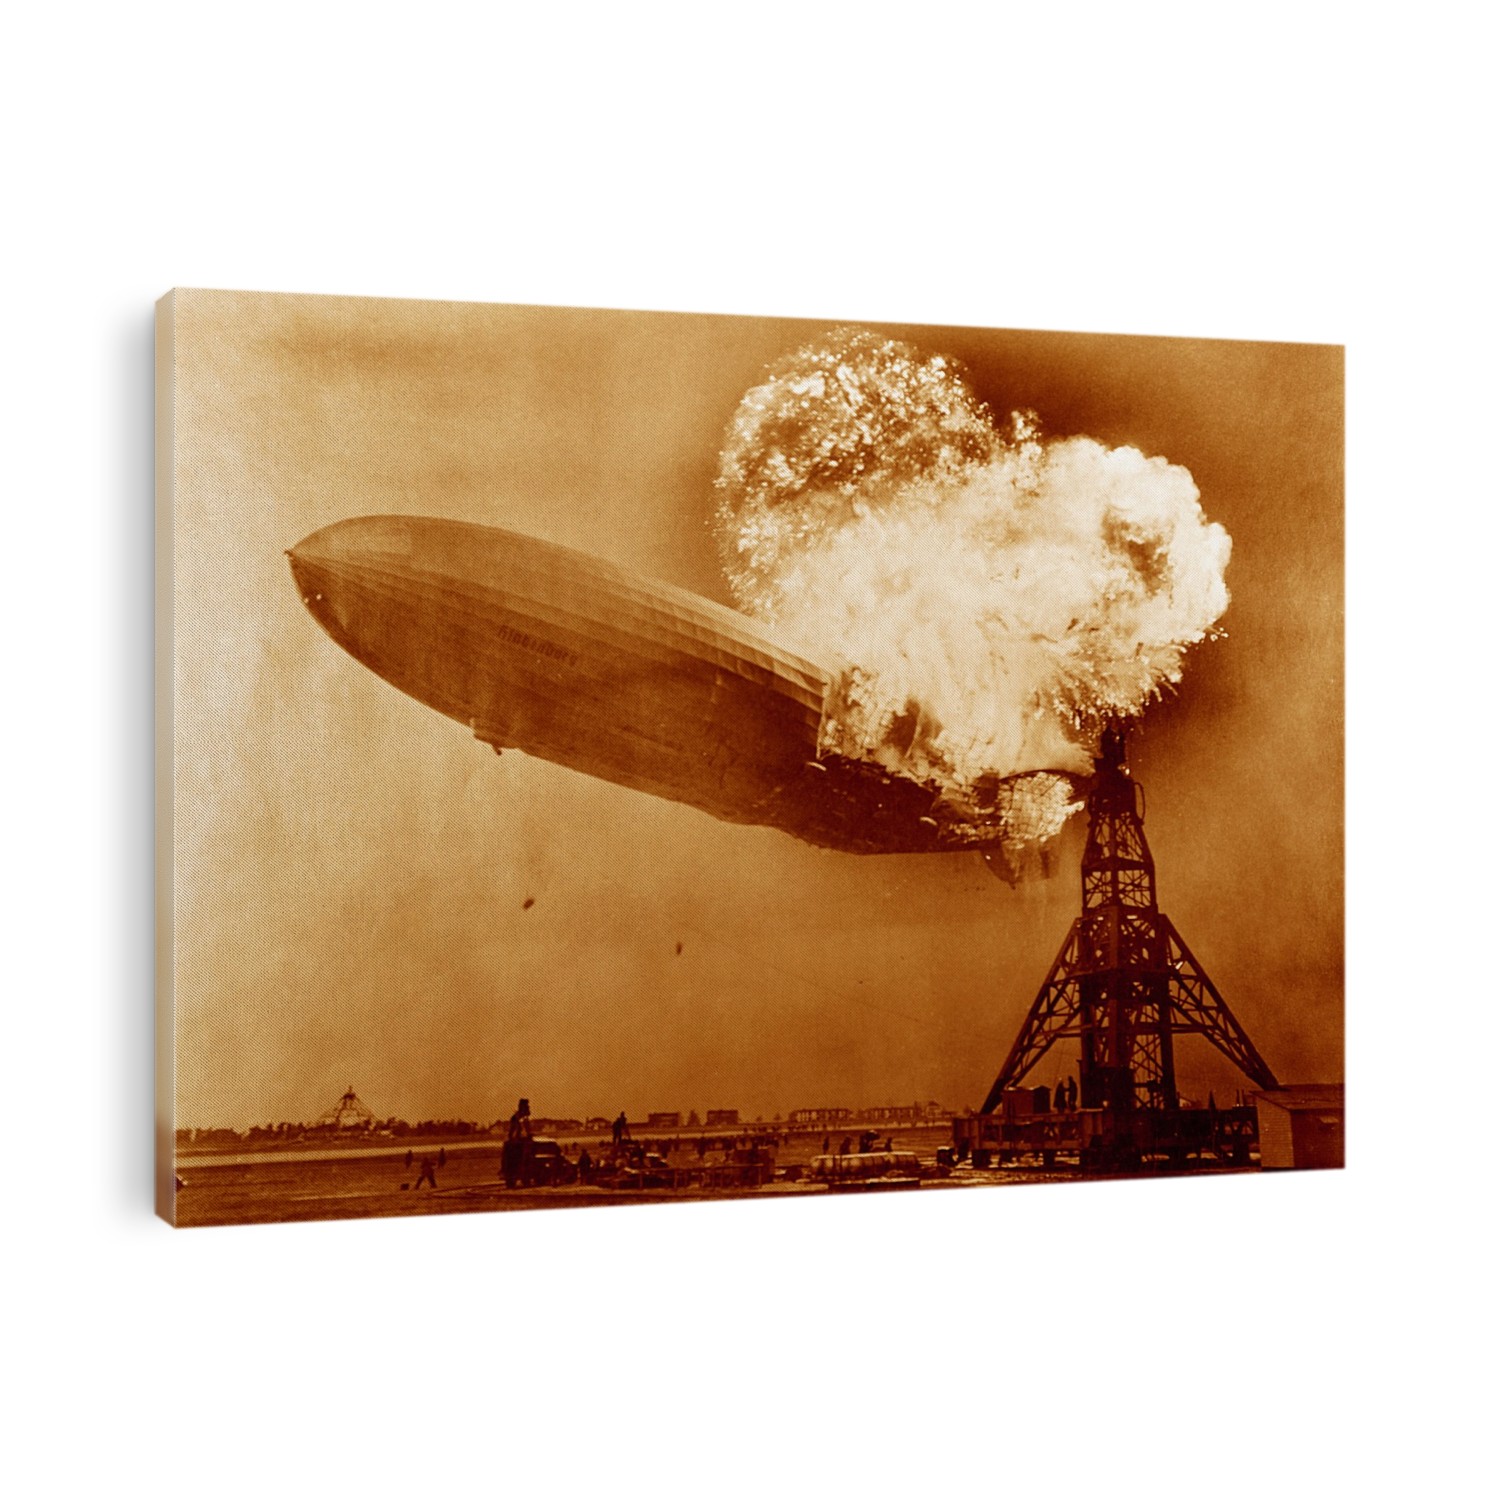 Hindenburg disaster, coloured image. View of the German airship Hindenburg (LZ 129) on fire over Naval Air Station (NAS) Lakehurst, New Jersey, USA, on 6th May 1937. This airship is famous for the Hindenburg disaster of 6th May 1937, when it caught fire and was destroyed during its attempt to dock with its mooring mast at NAS Lakehurst. Of the 97 crew and passengers on board 35 were killed, along with one member of the ground crew. The balloon was filled with hydrogen, a highly flammable gas. The cause of the accident has never been established but the disaster destroyed public confidence and marked the abrupt end of the airship era. Here the ships water ballast tanks (black dots, lower centre-left) can be seen falling.